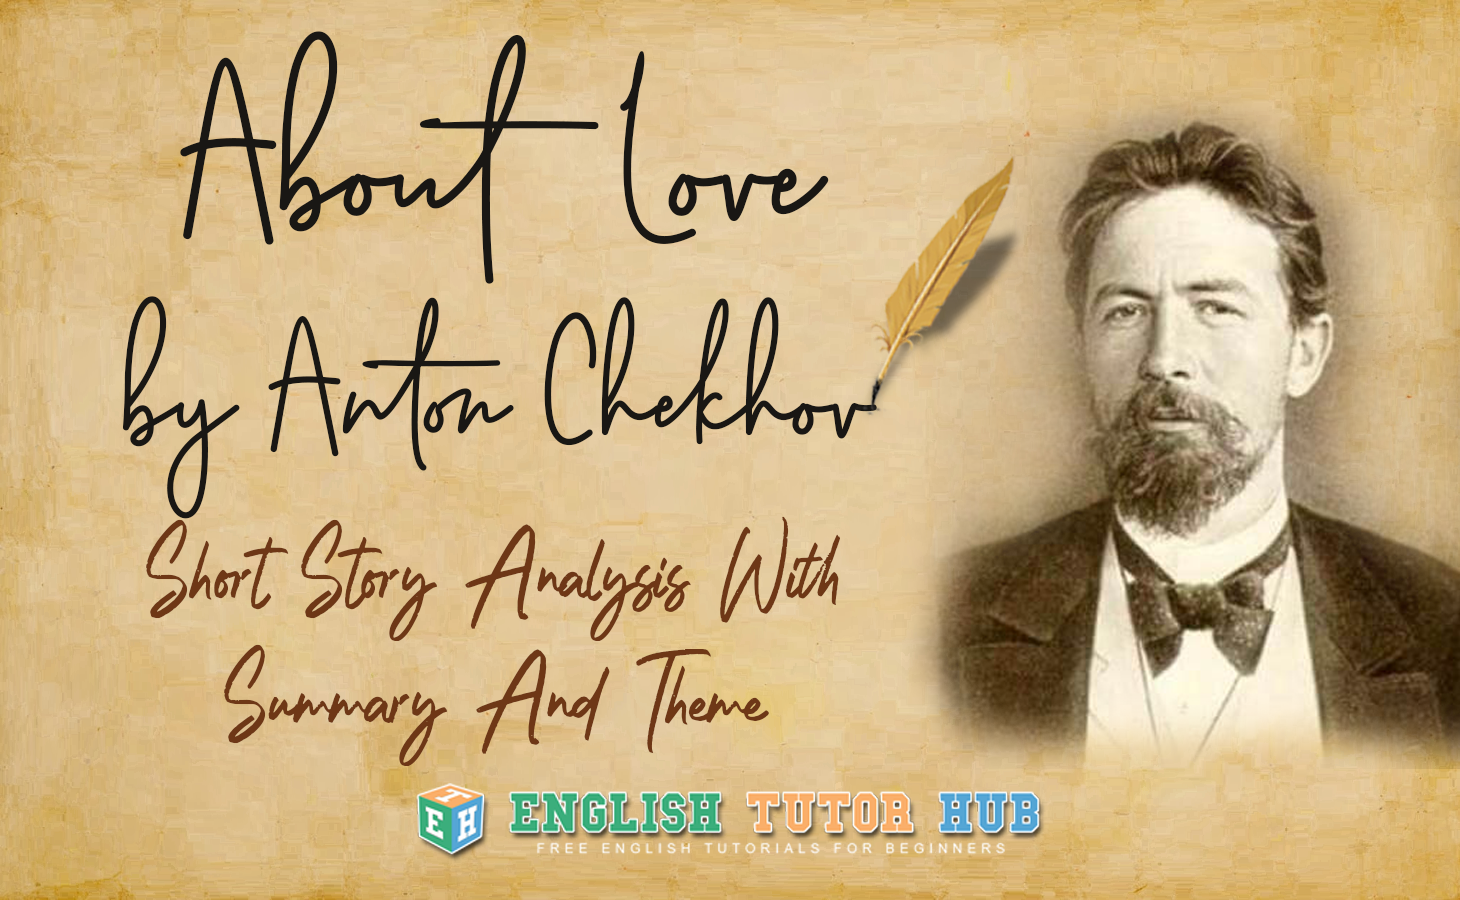 About Love by Anton Chekhov Short Story Analysis With Summary And Theme